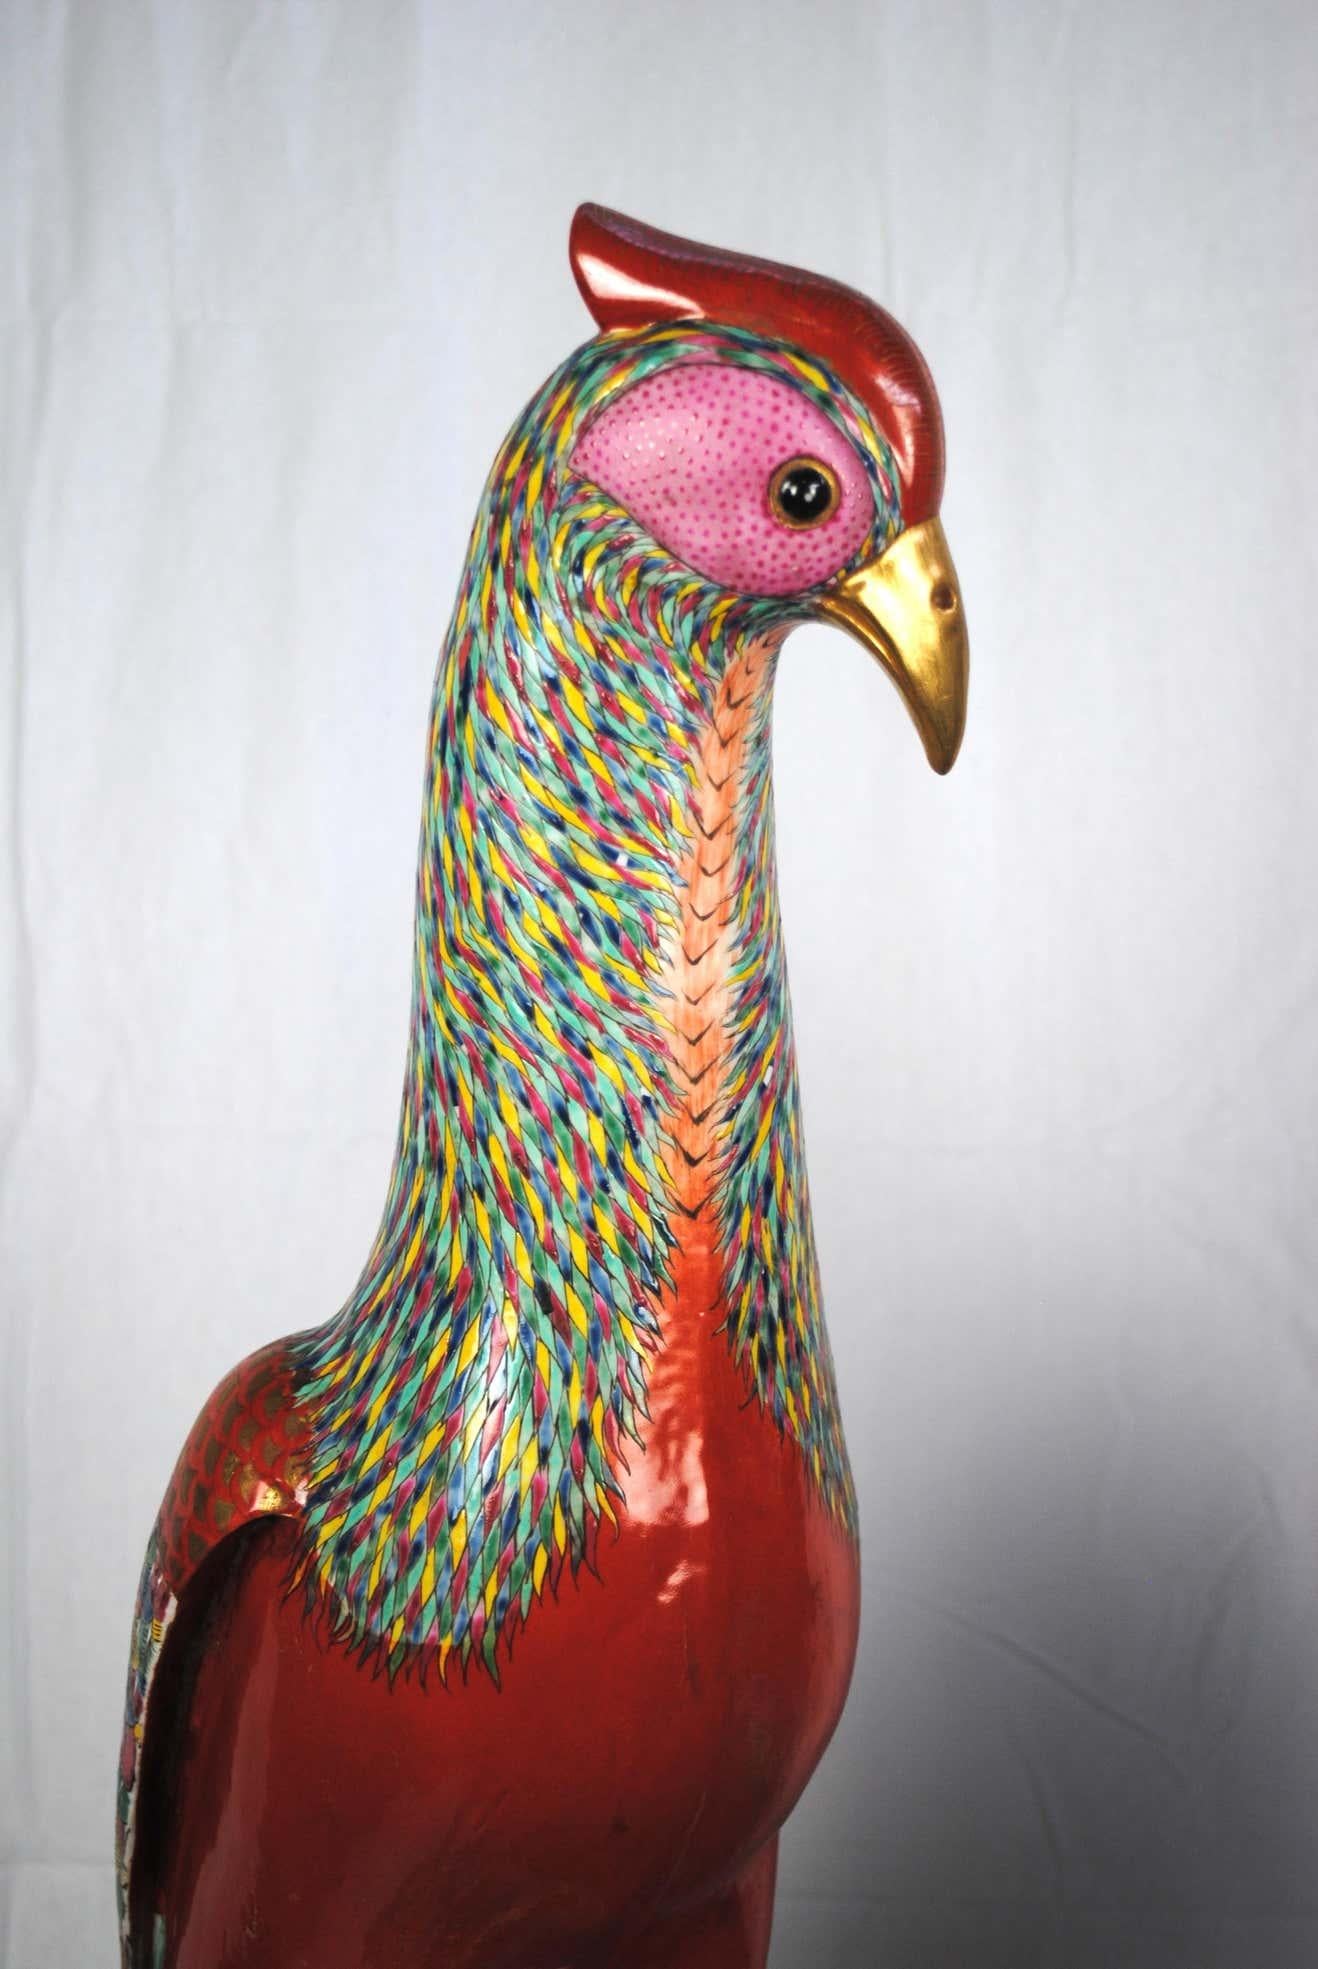 A large pair of Famille Rose pheasants by Samson. The size alone makes them very rear and highly collectable. They are in extremely good condition with the colors speaking for themselves, circa 1860. Formed in in slightly different poses to add to